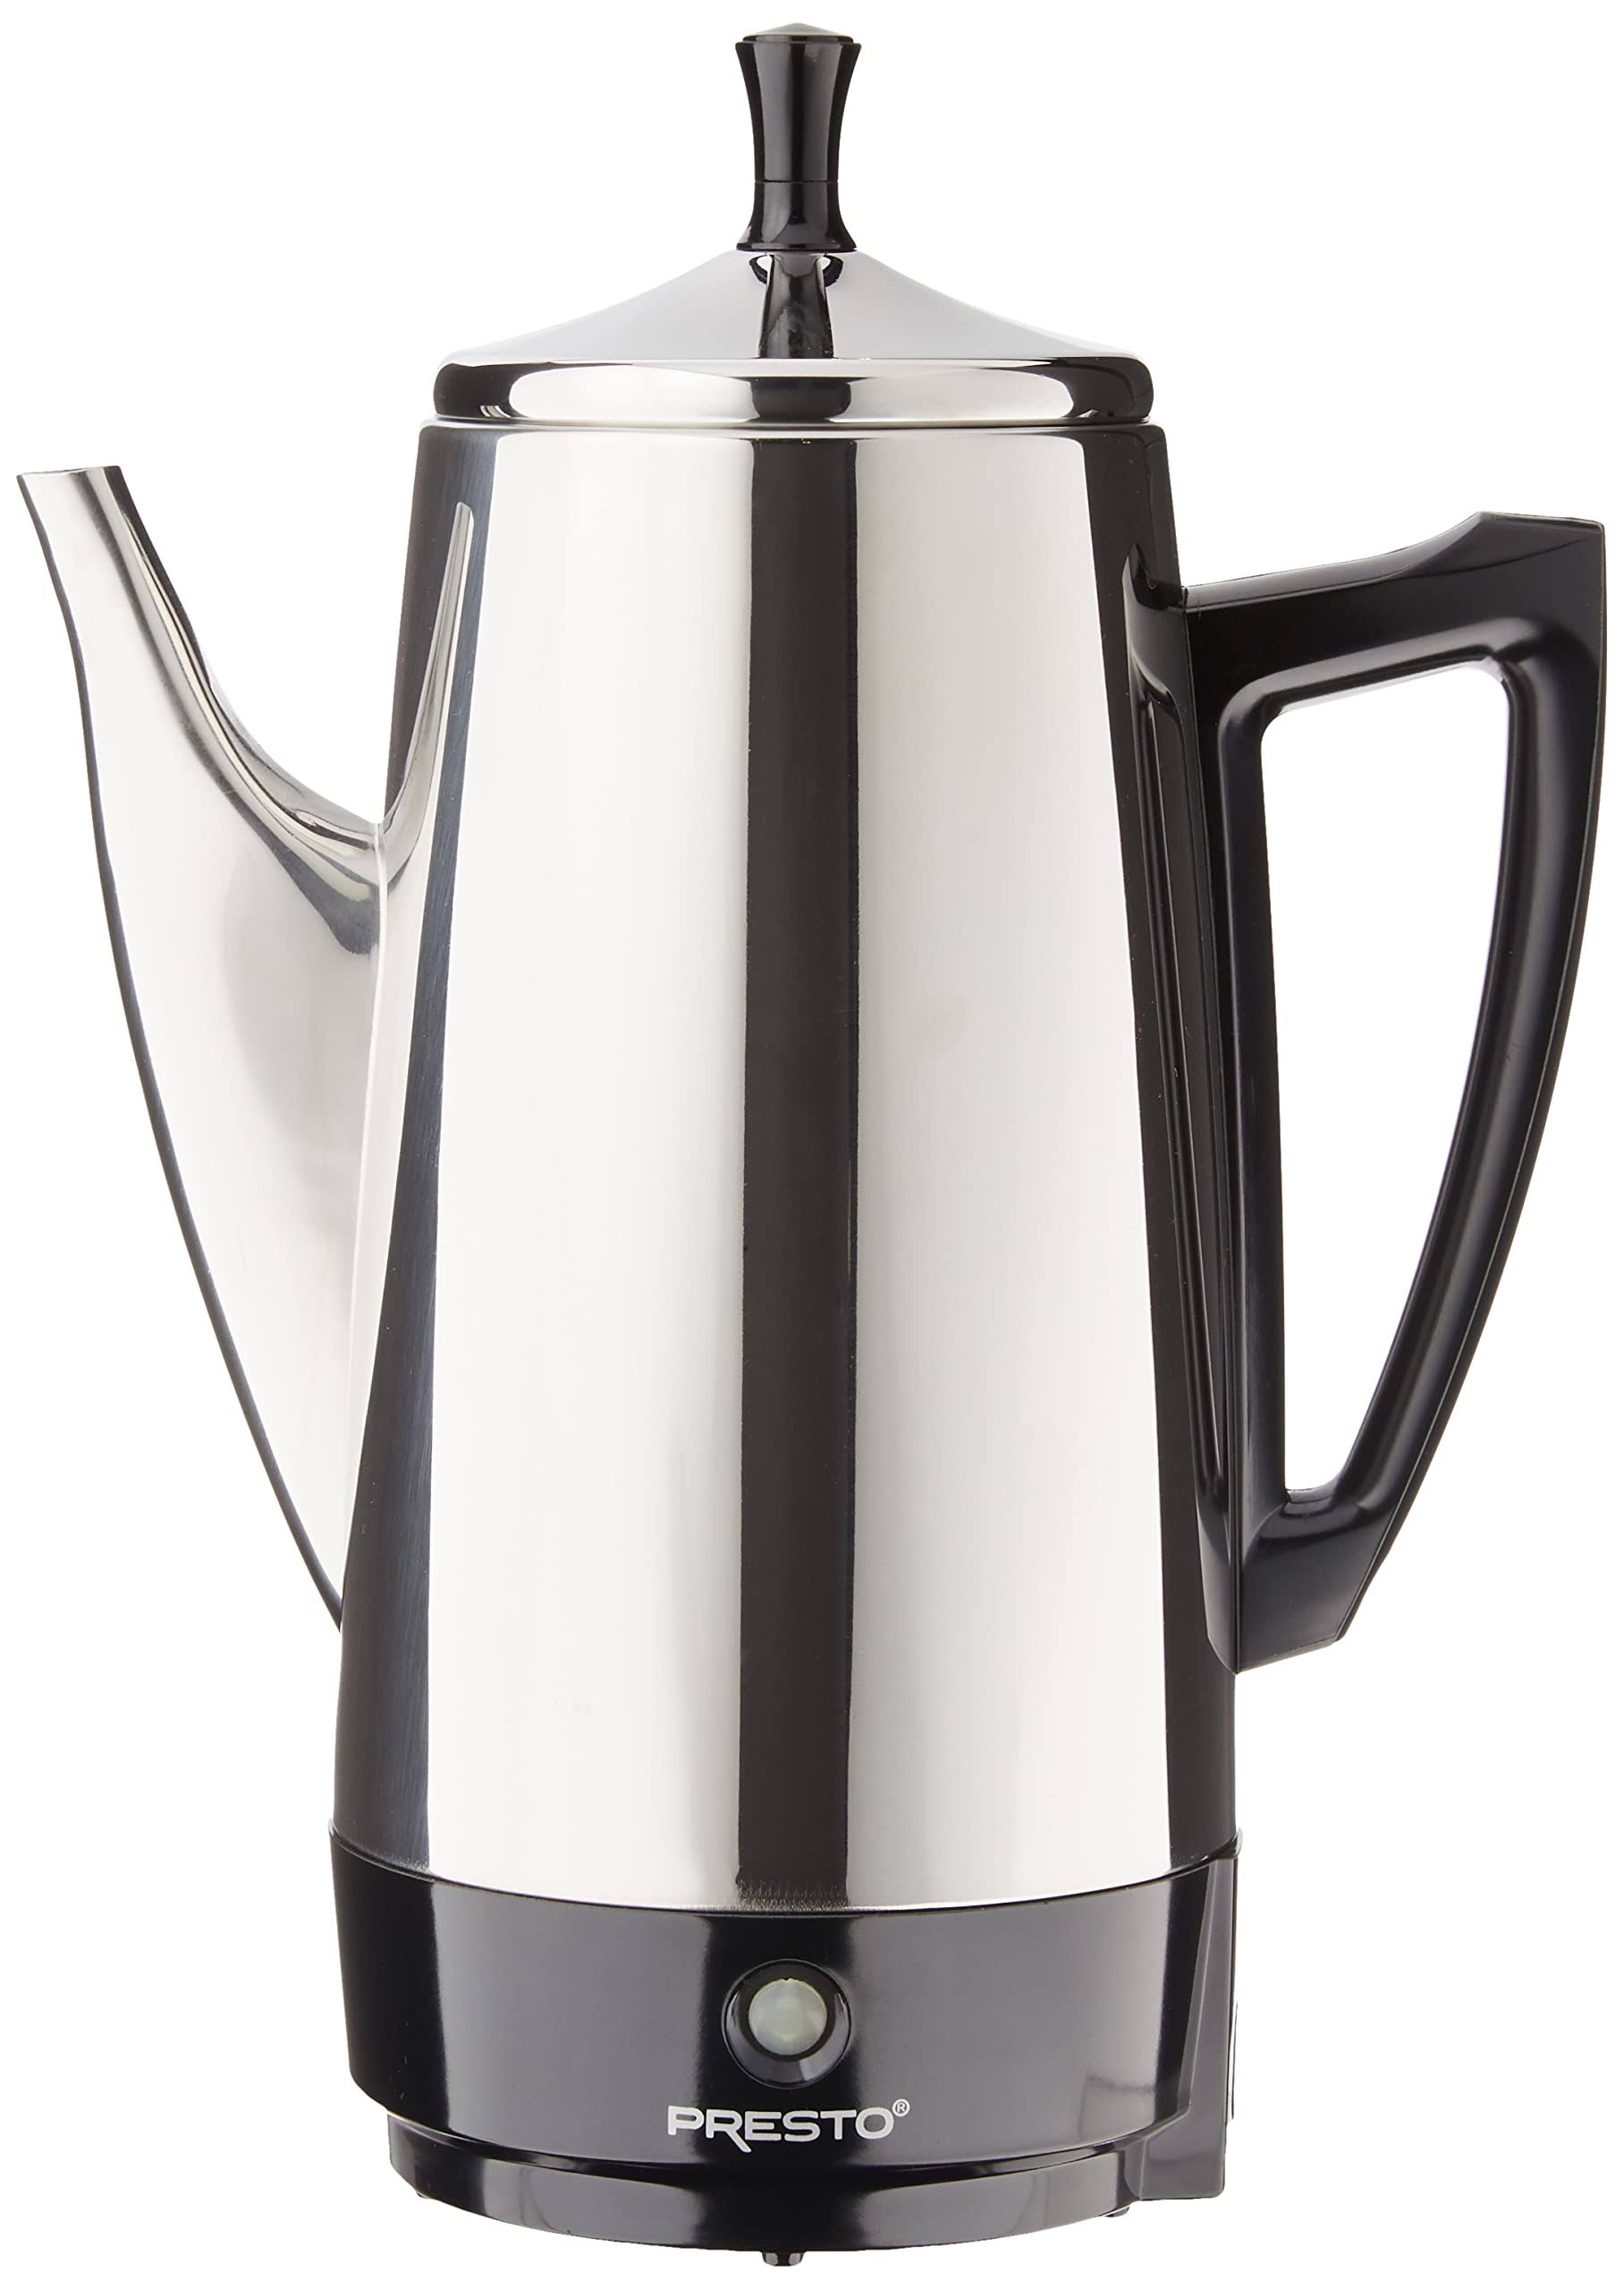 Presto 02811 12-Cup Stainless Steel Coffee Maker - Silver